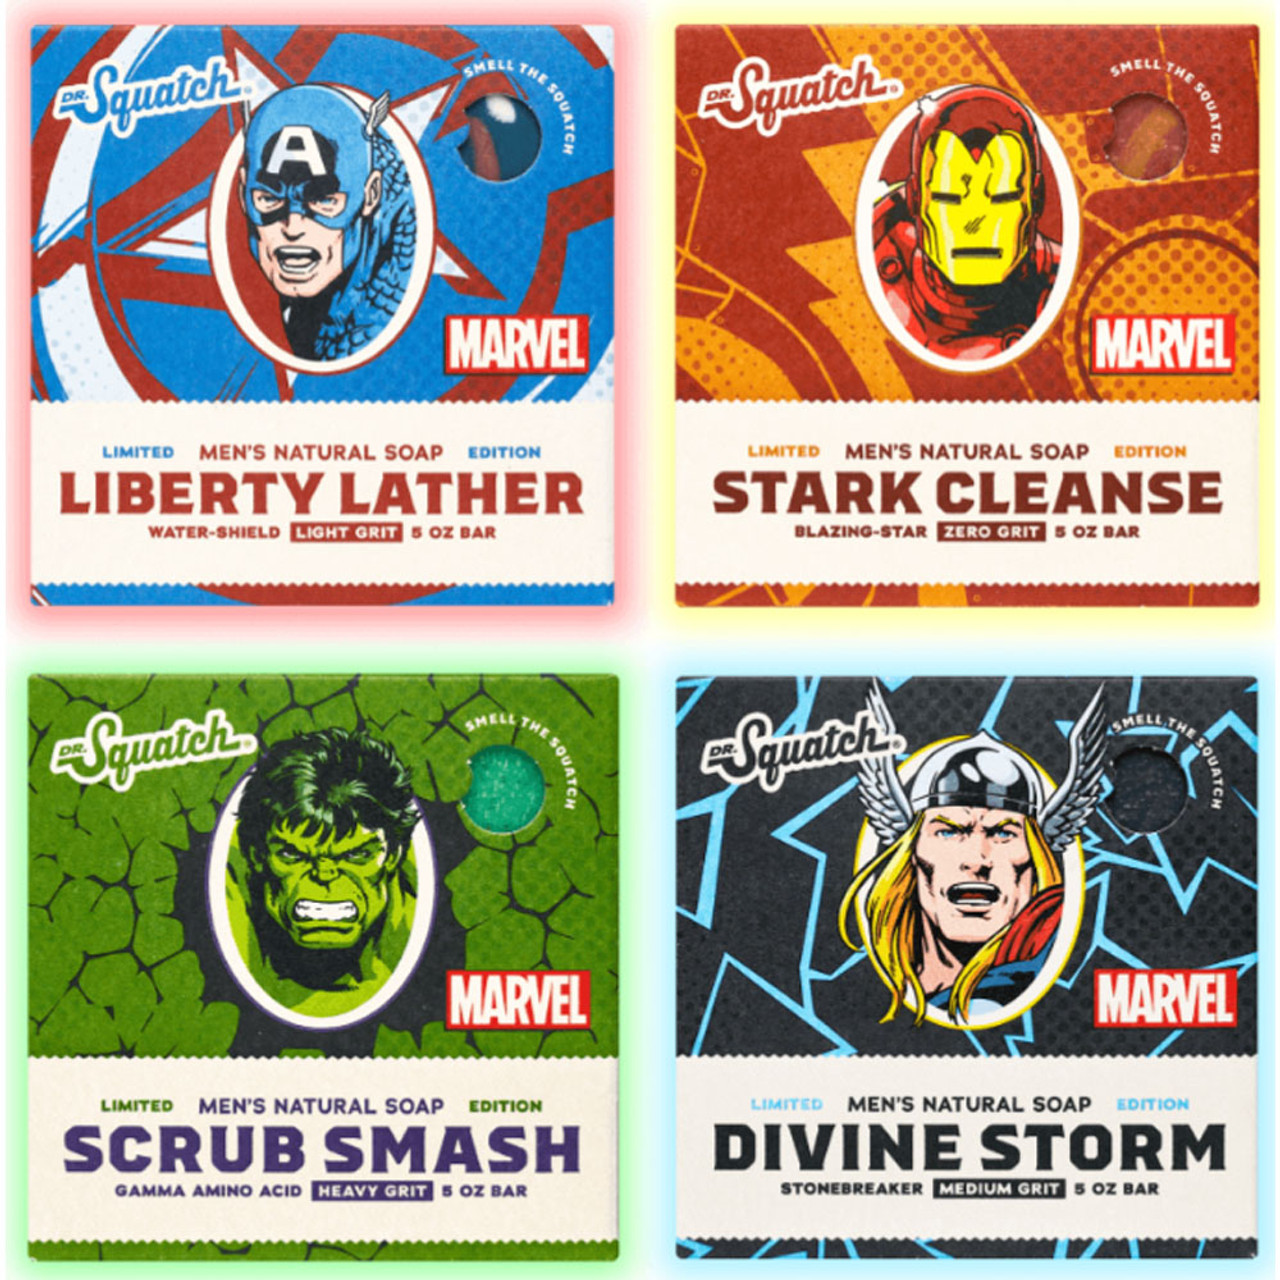 https://cdn11.bigcommerce.com/s-zut1msomd6/images/stencil/1280x1280/products/39612/239642/Dr-squatch-soaps-avengers-collection-box-kit-avg-01-avengers-collection-famous-4-heroes__06704.1695999557.jpg?c=1